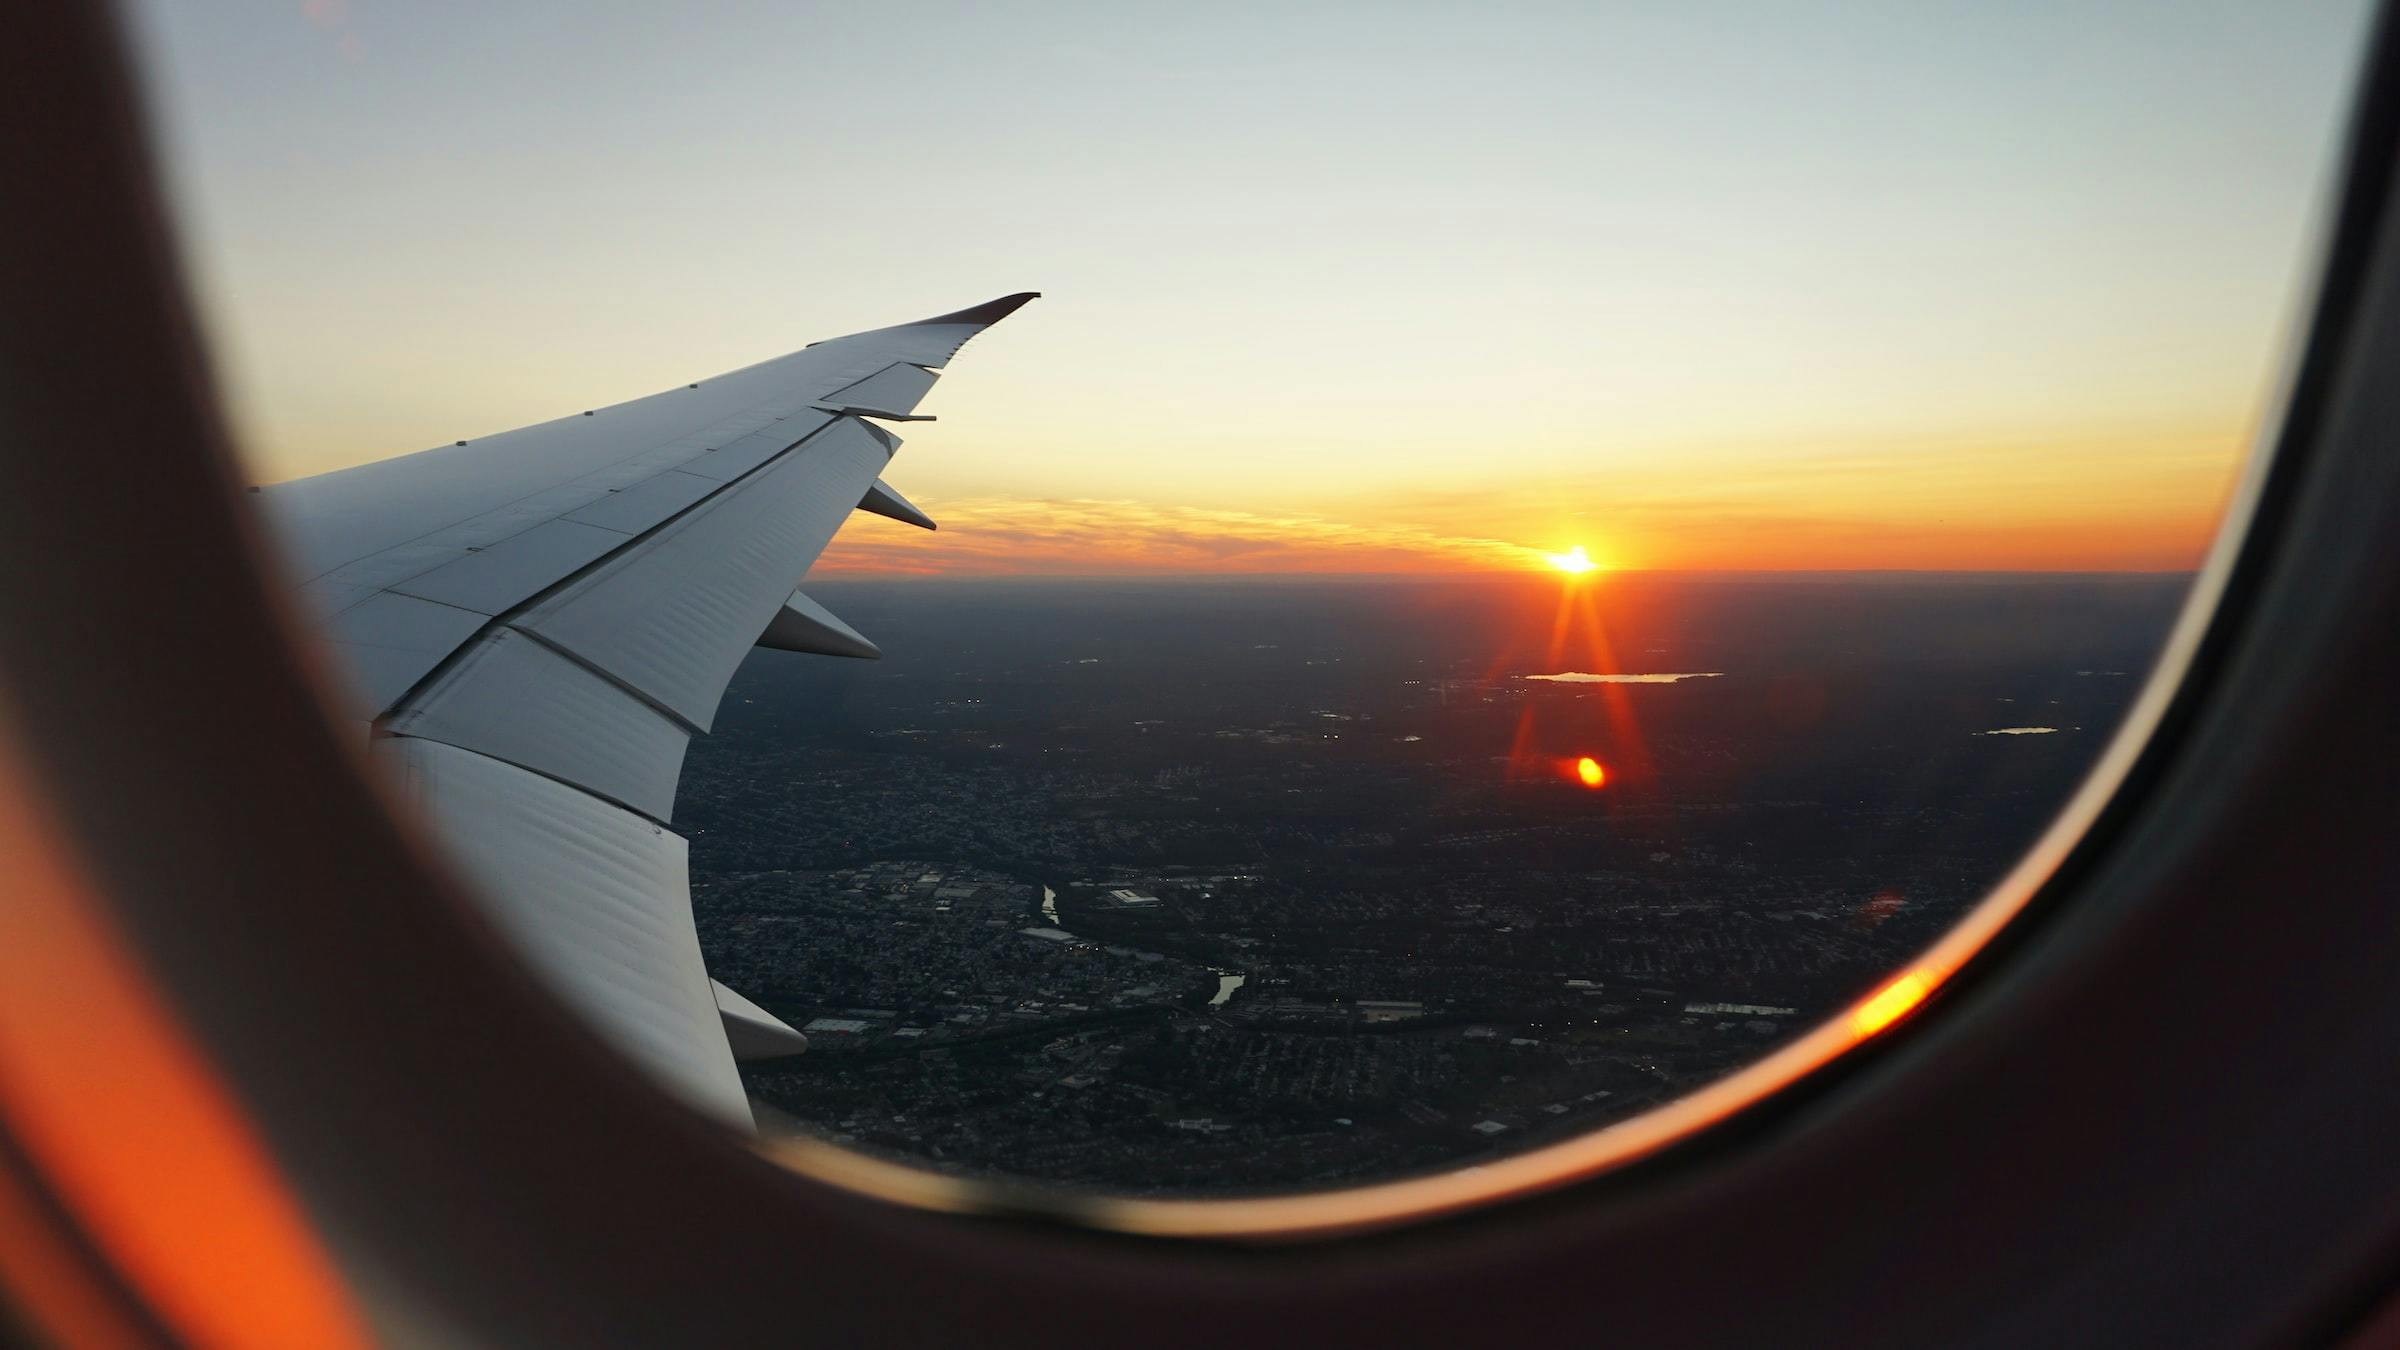 Sunset seen from the window seat of a plane